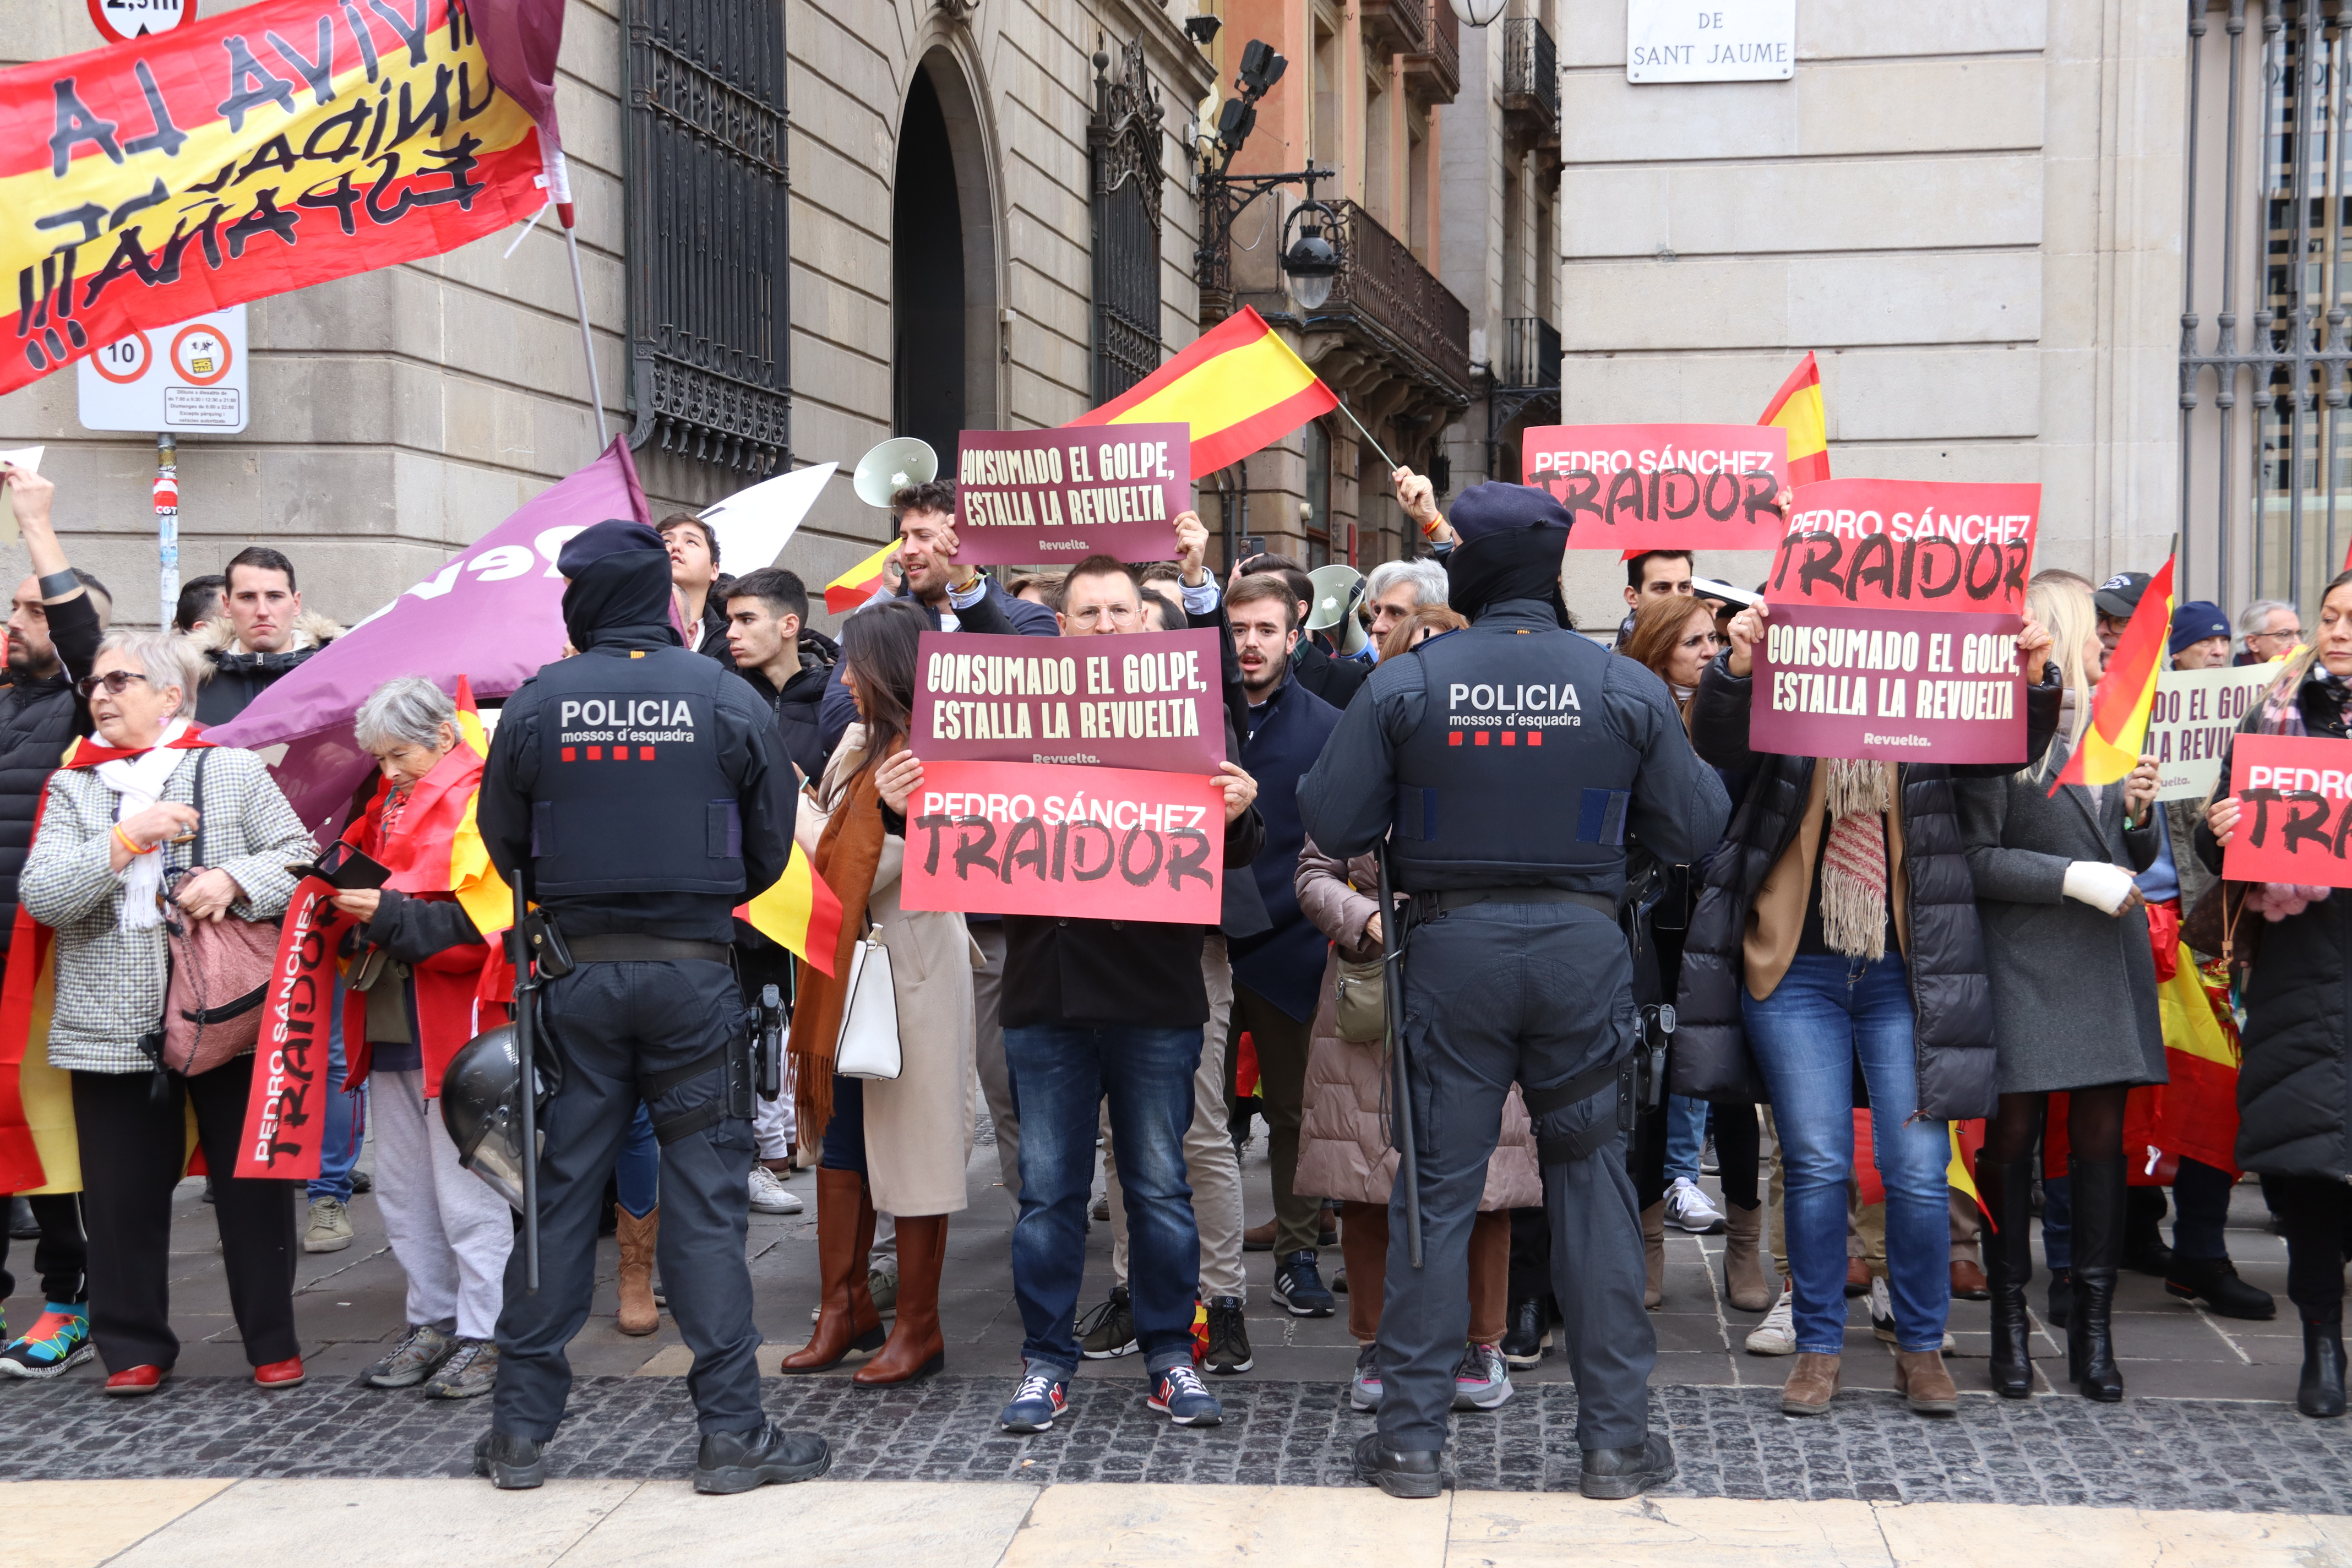 Protesters from Revuelta, an anti-independence group linked to the far-right Vox